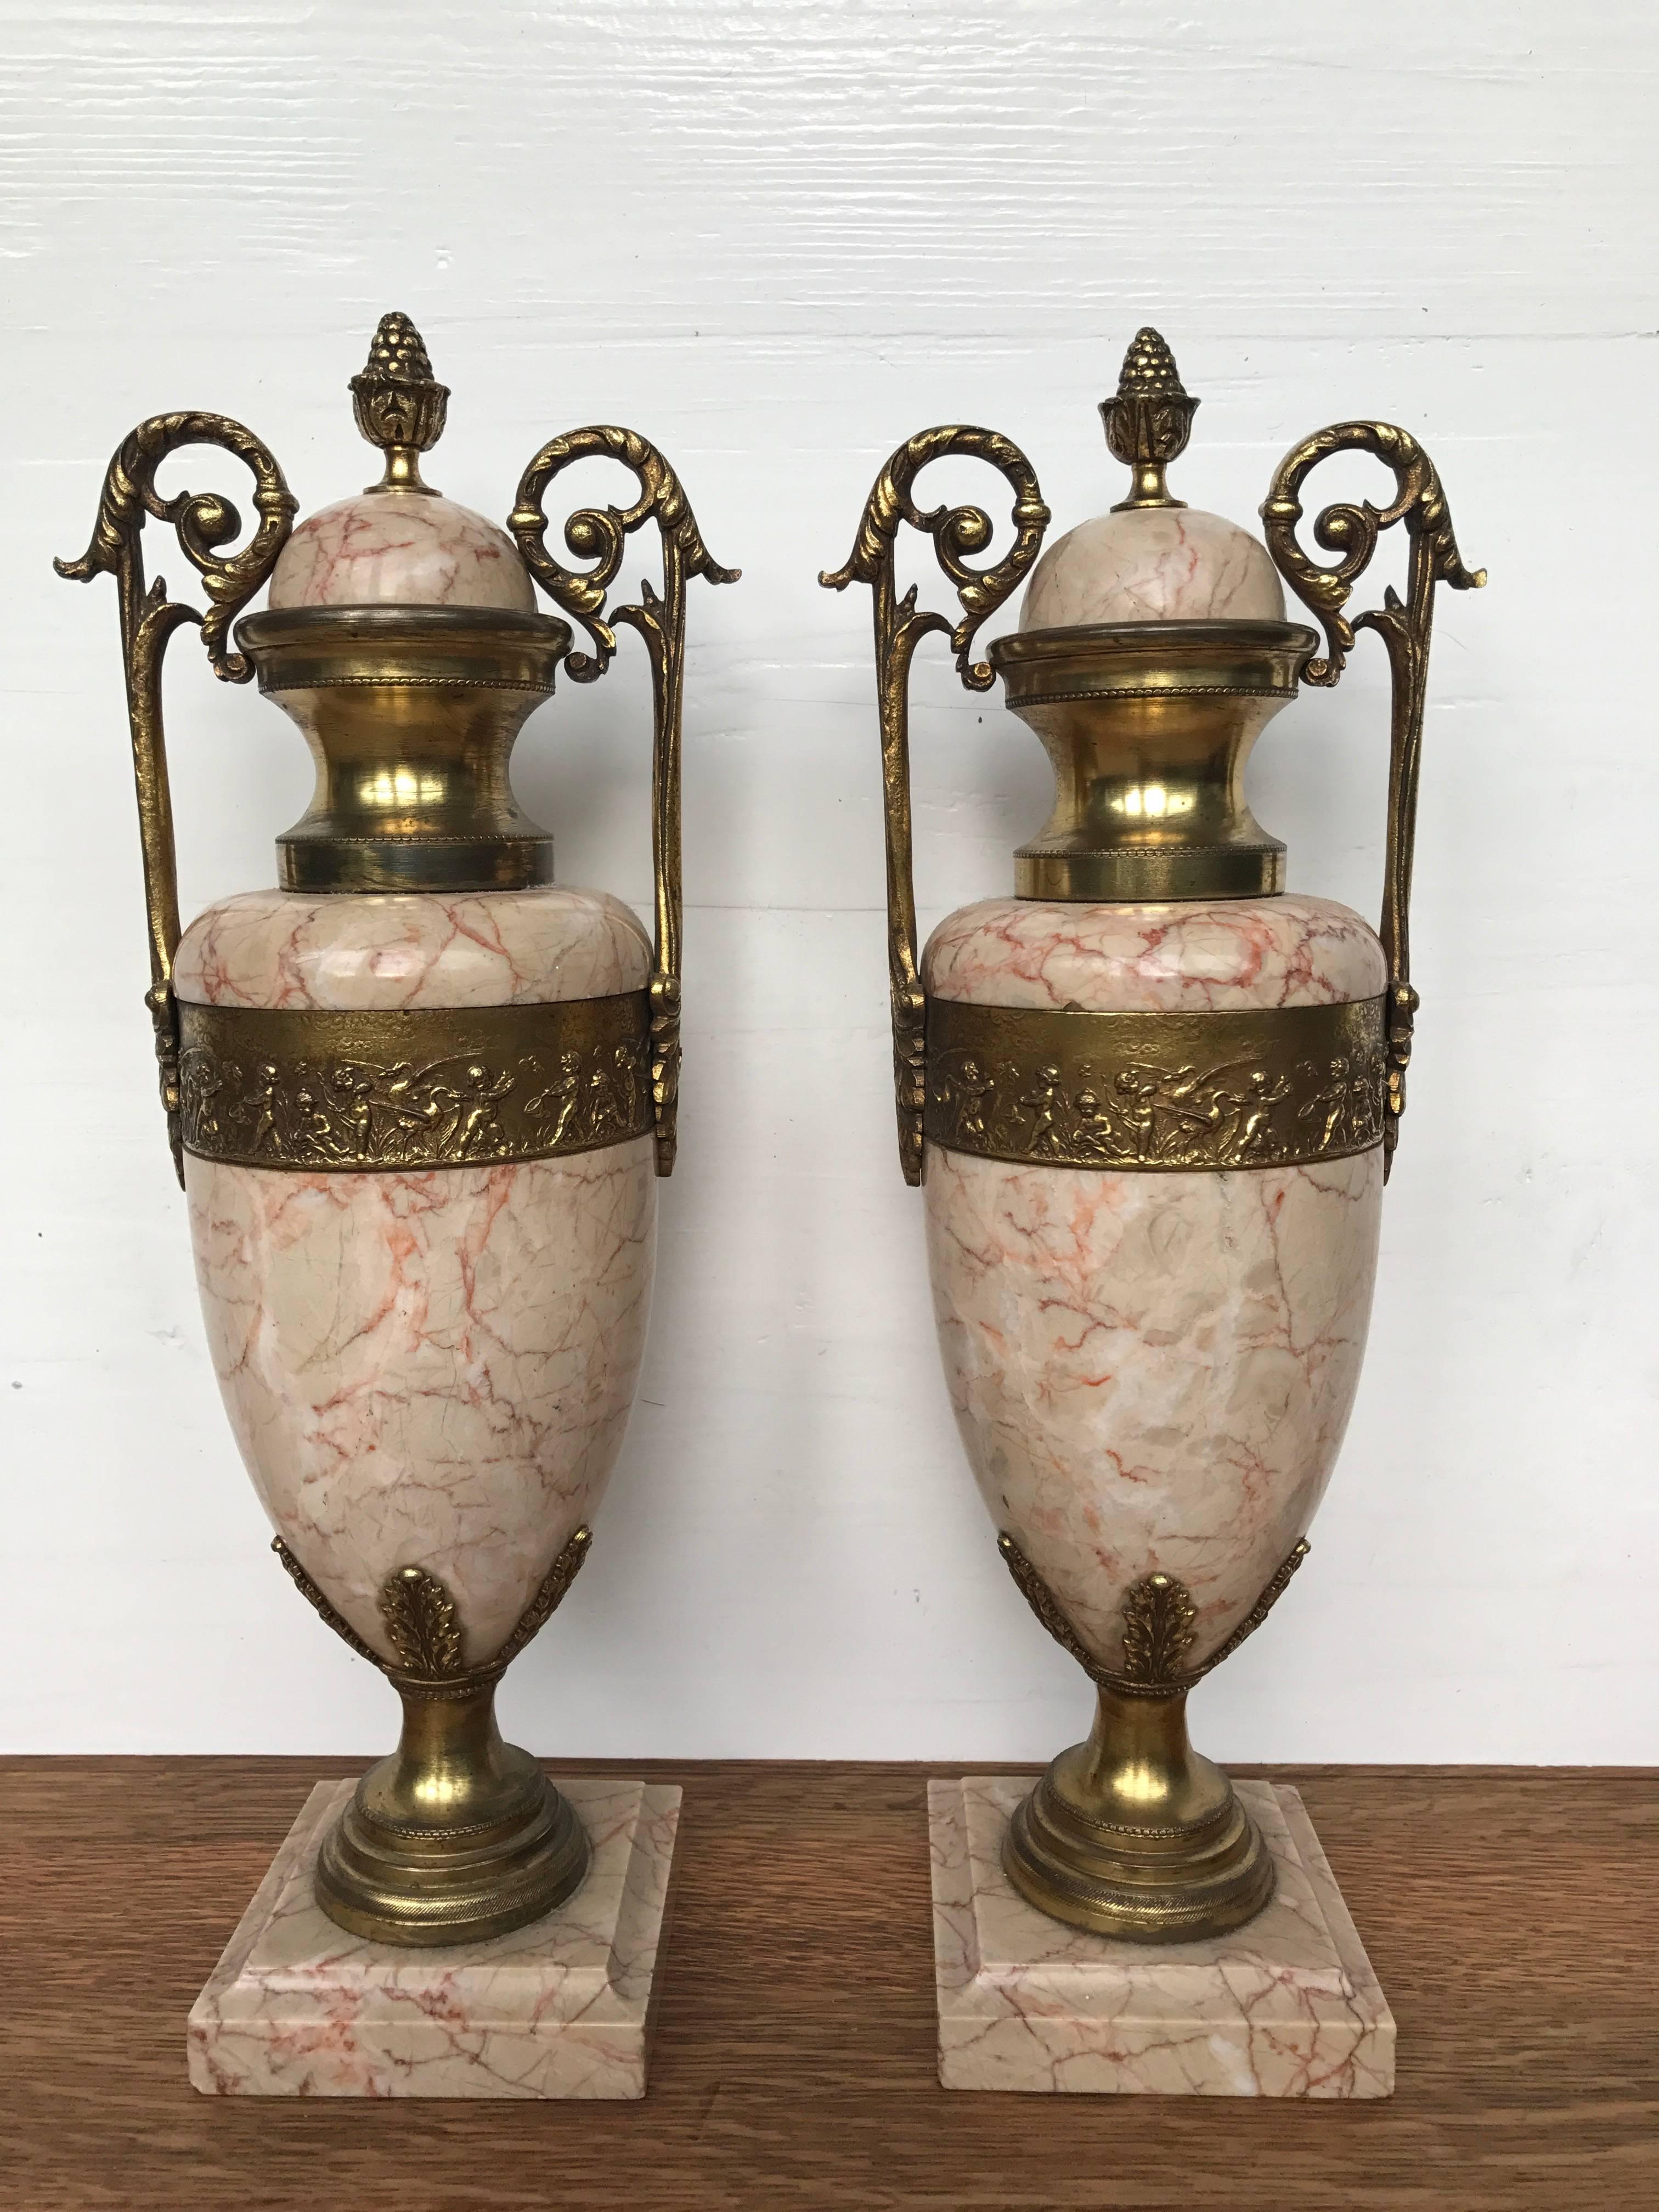 Amazing 19th century craftsmanship and a bargain for the collectors.

These beautiful quality and condition cassolettes are an absolute joy to own and look at. The combination of the fine quality marble with its red veins and the many gilt bronze